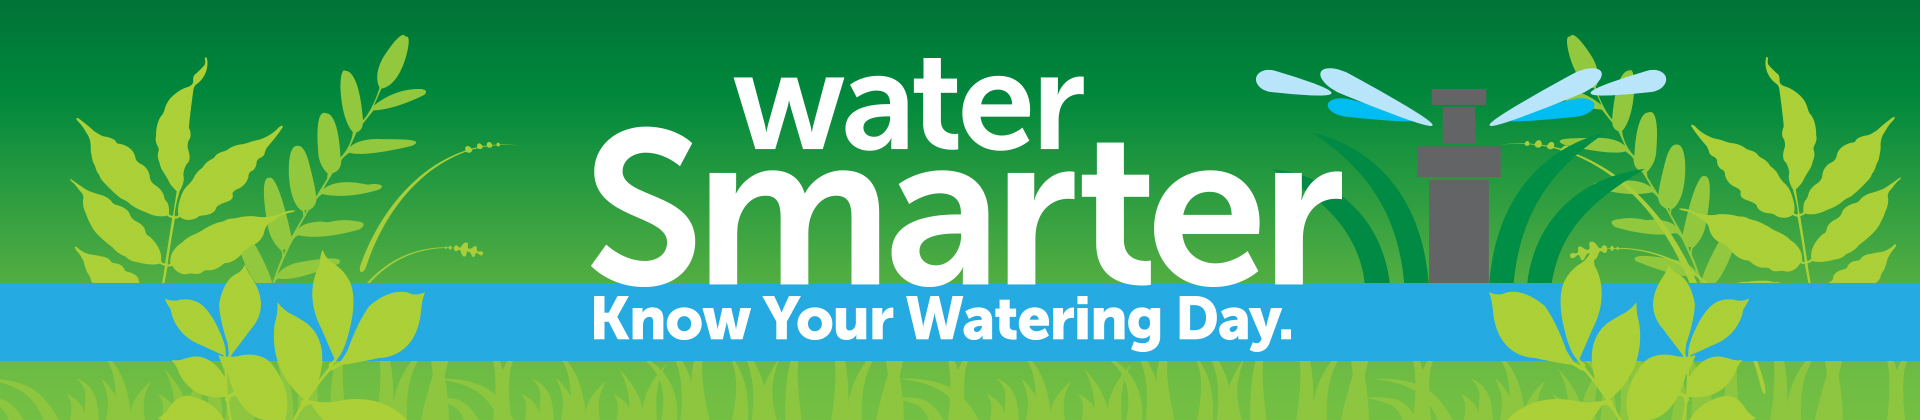 Water Smarter: Know you watering days